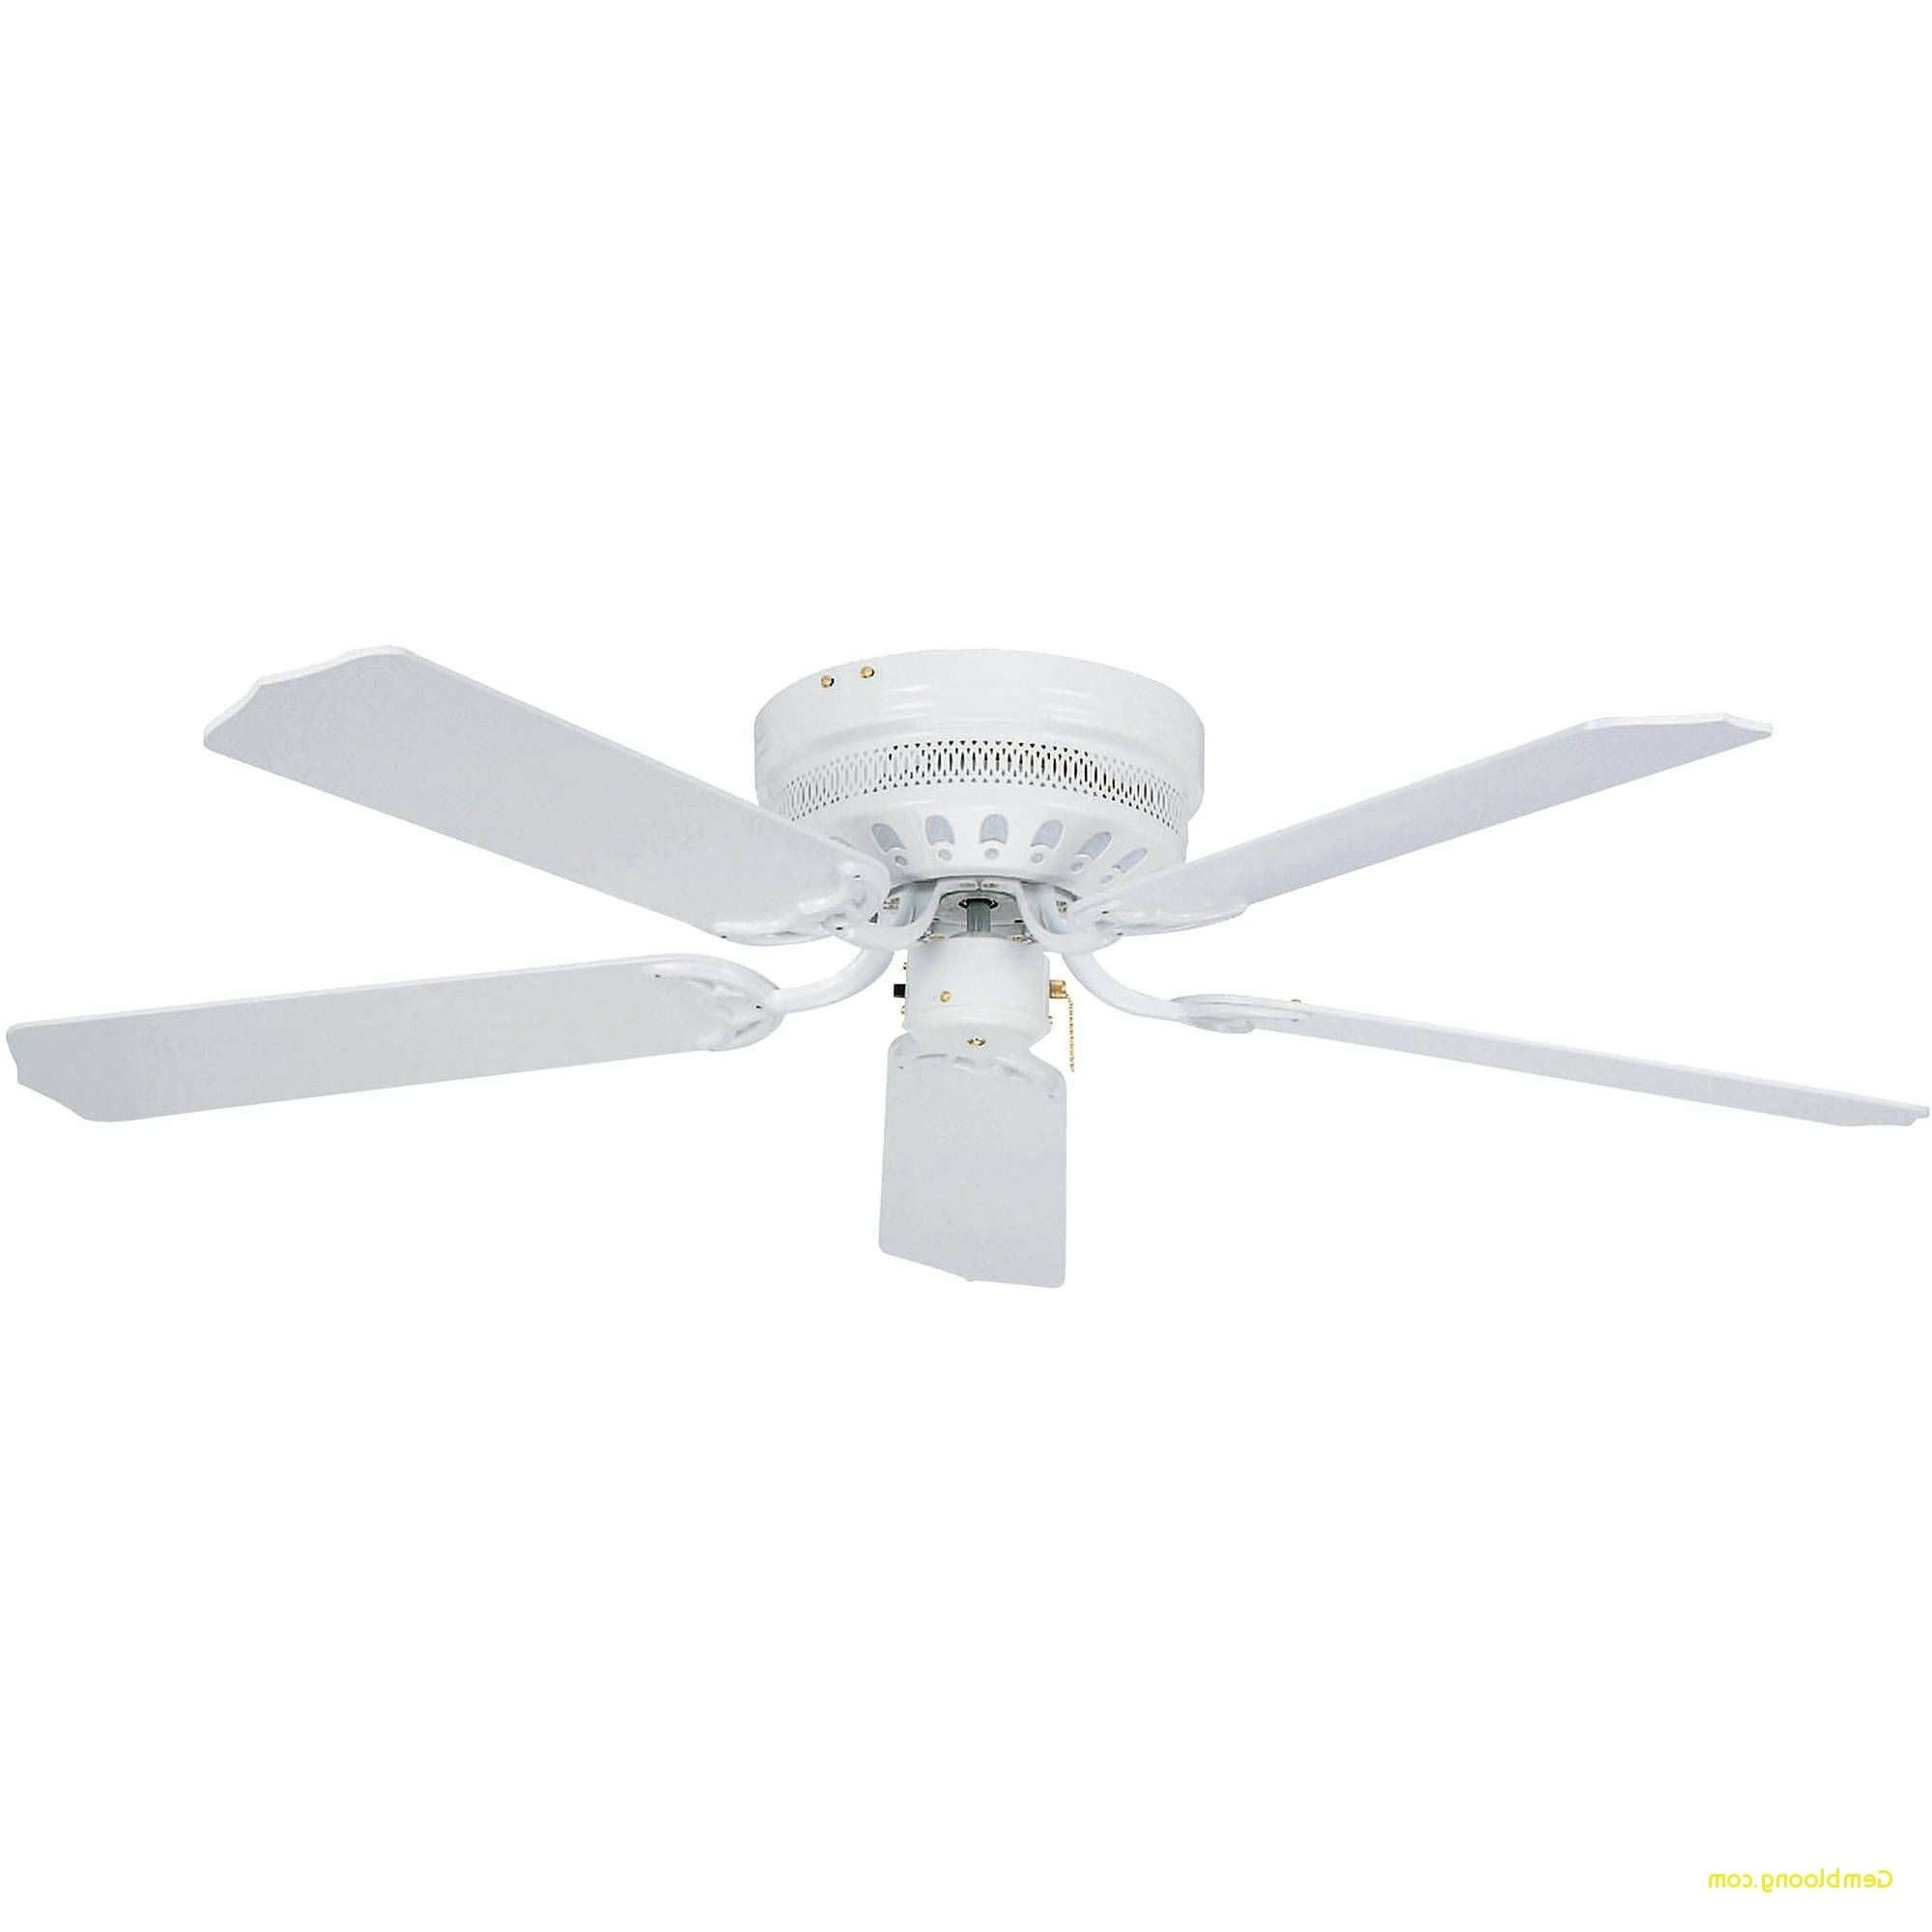 Outdoor Ceiling Fans Under $50 Regarding Trendy Ceiling Fans Under $50 New 25 New Indoor Outdoor Ceiling Fans With (View 1 of 20)